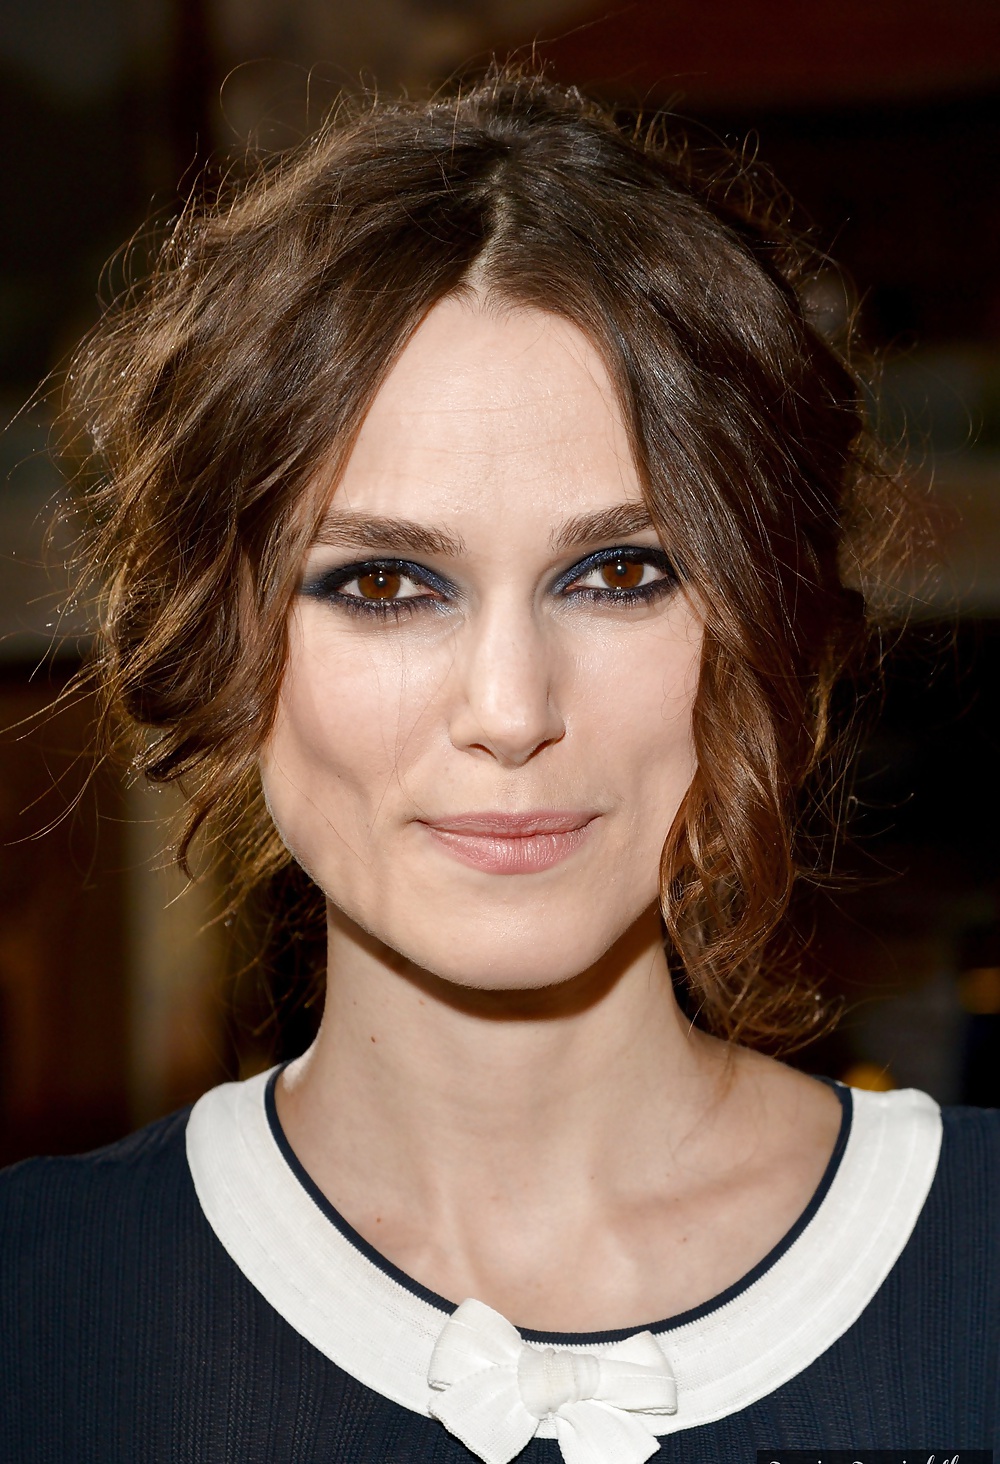 Keira Knightley The Royal Lady of England #35649837